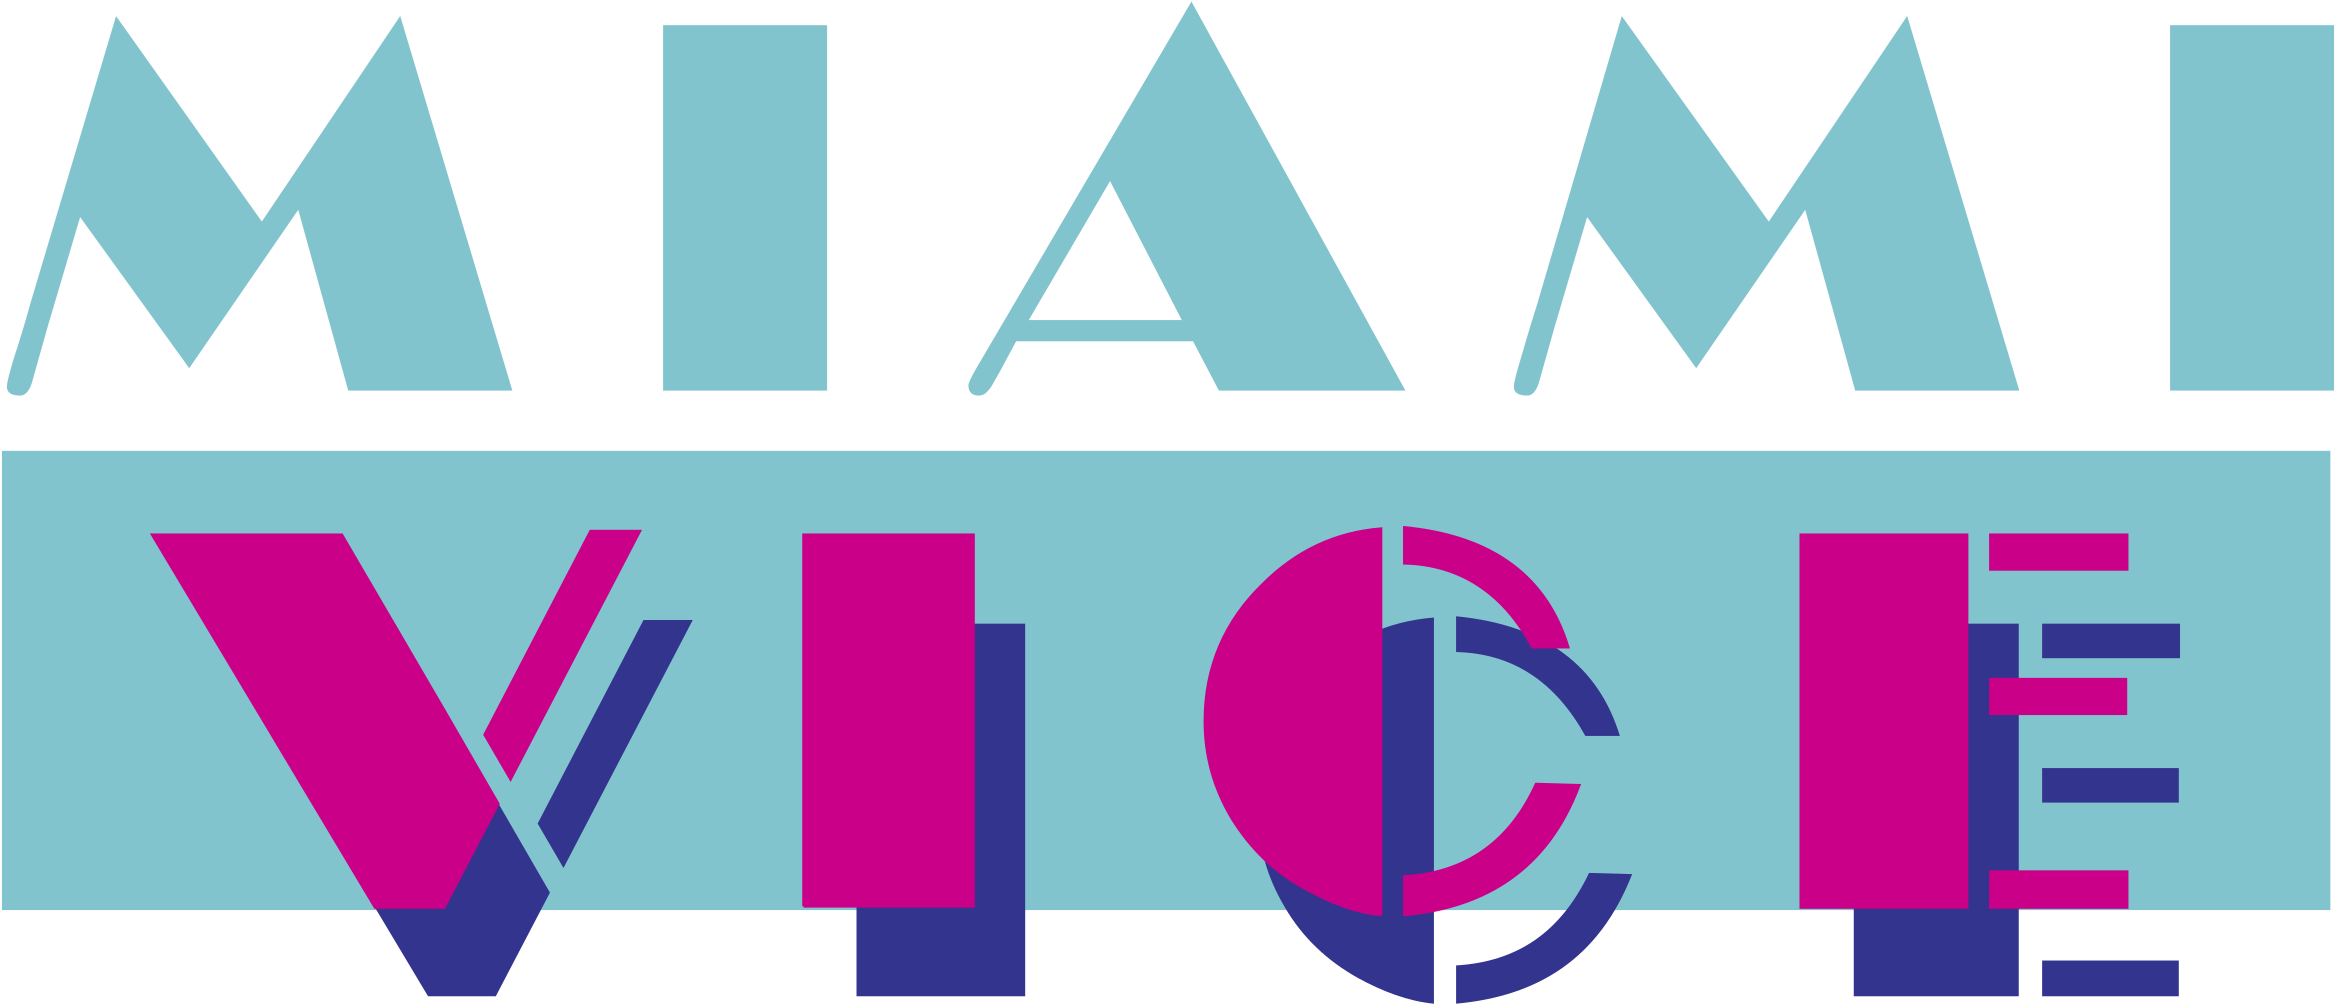 Download Miami Vice Logo Png Transparent Miami Vice Logo Png Image With No Background Pngkey Com